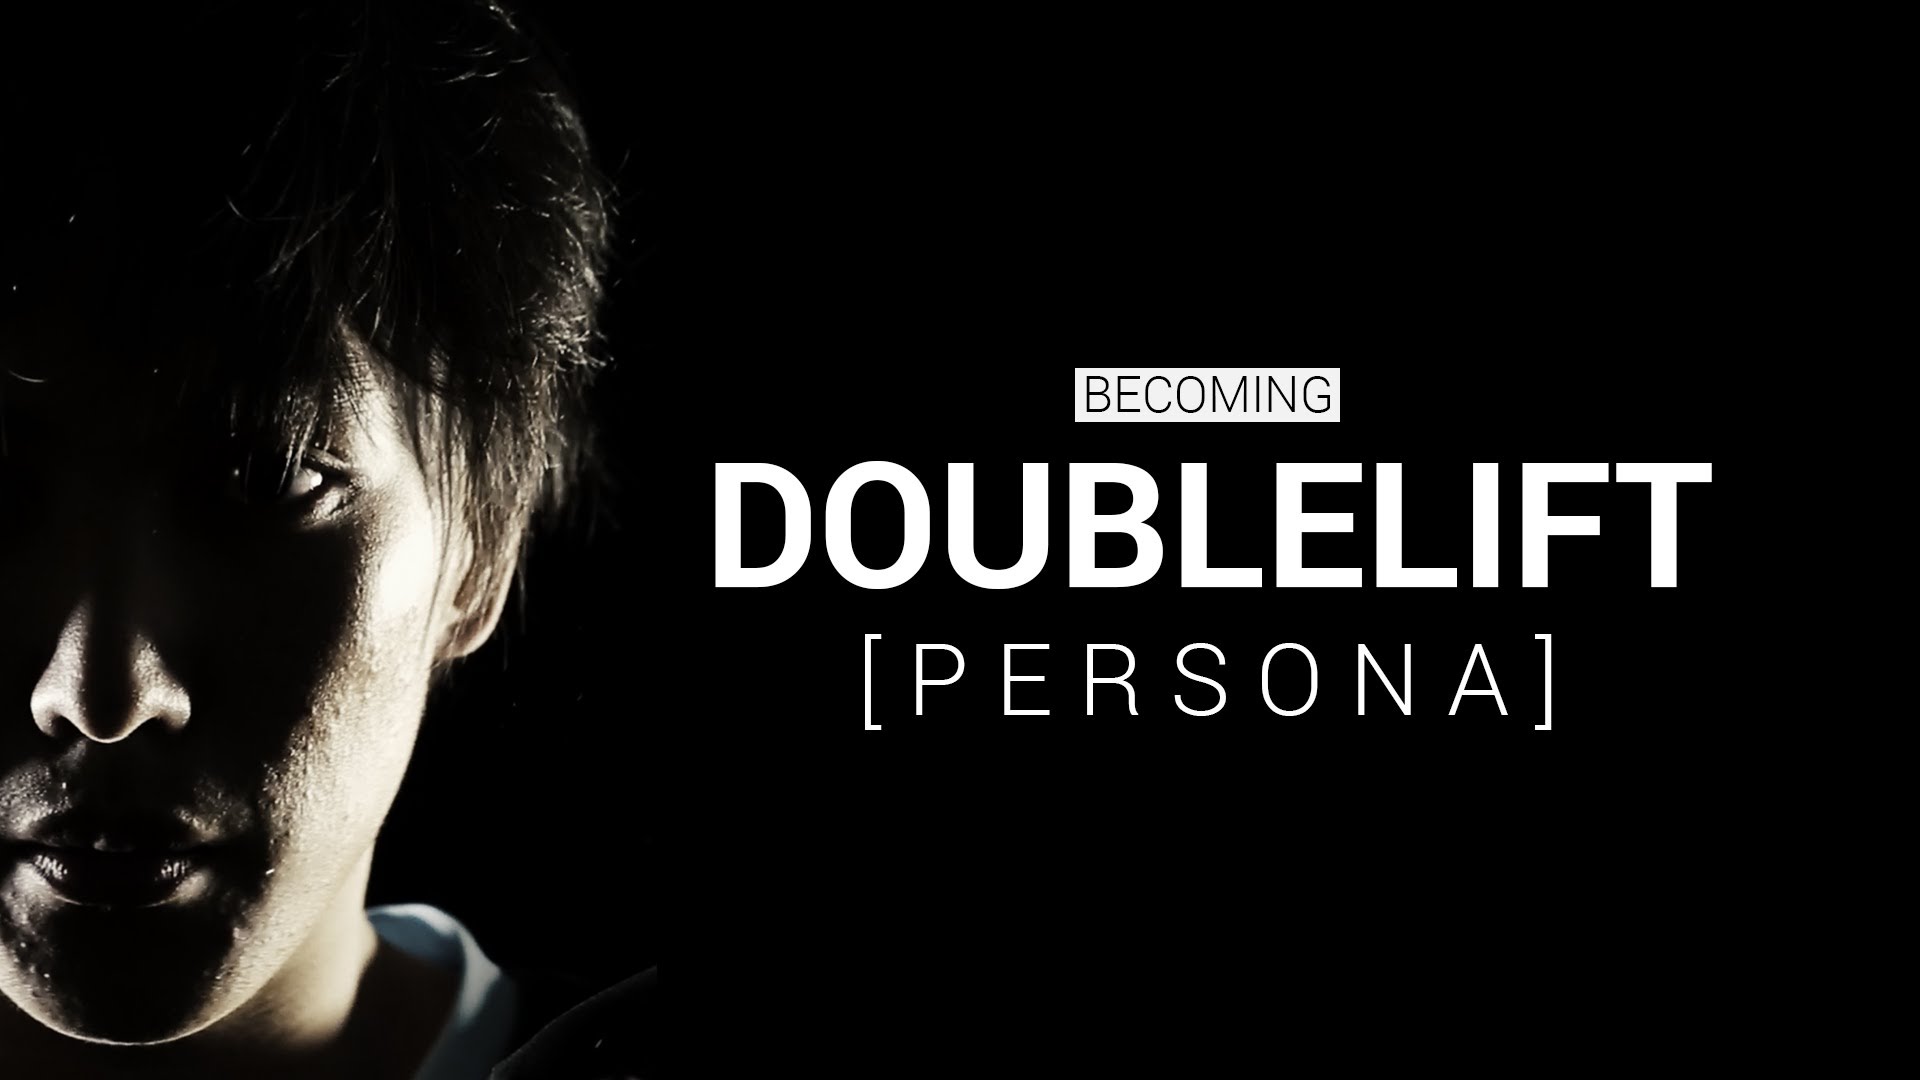 Doublelift Wallpaper Being Persona